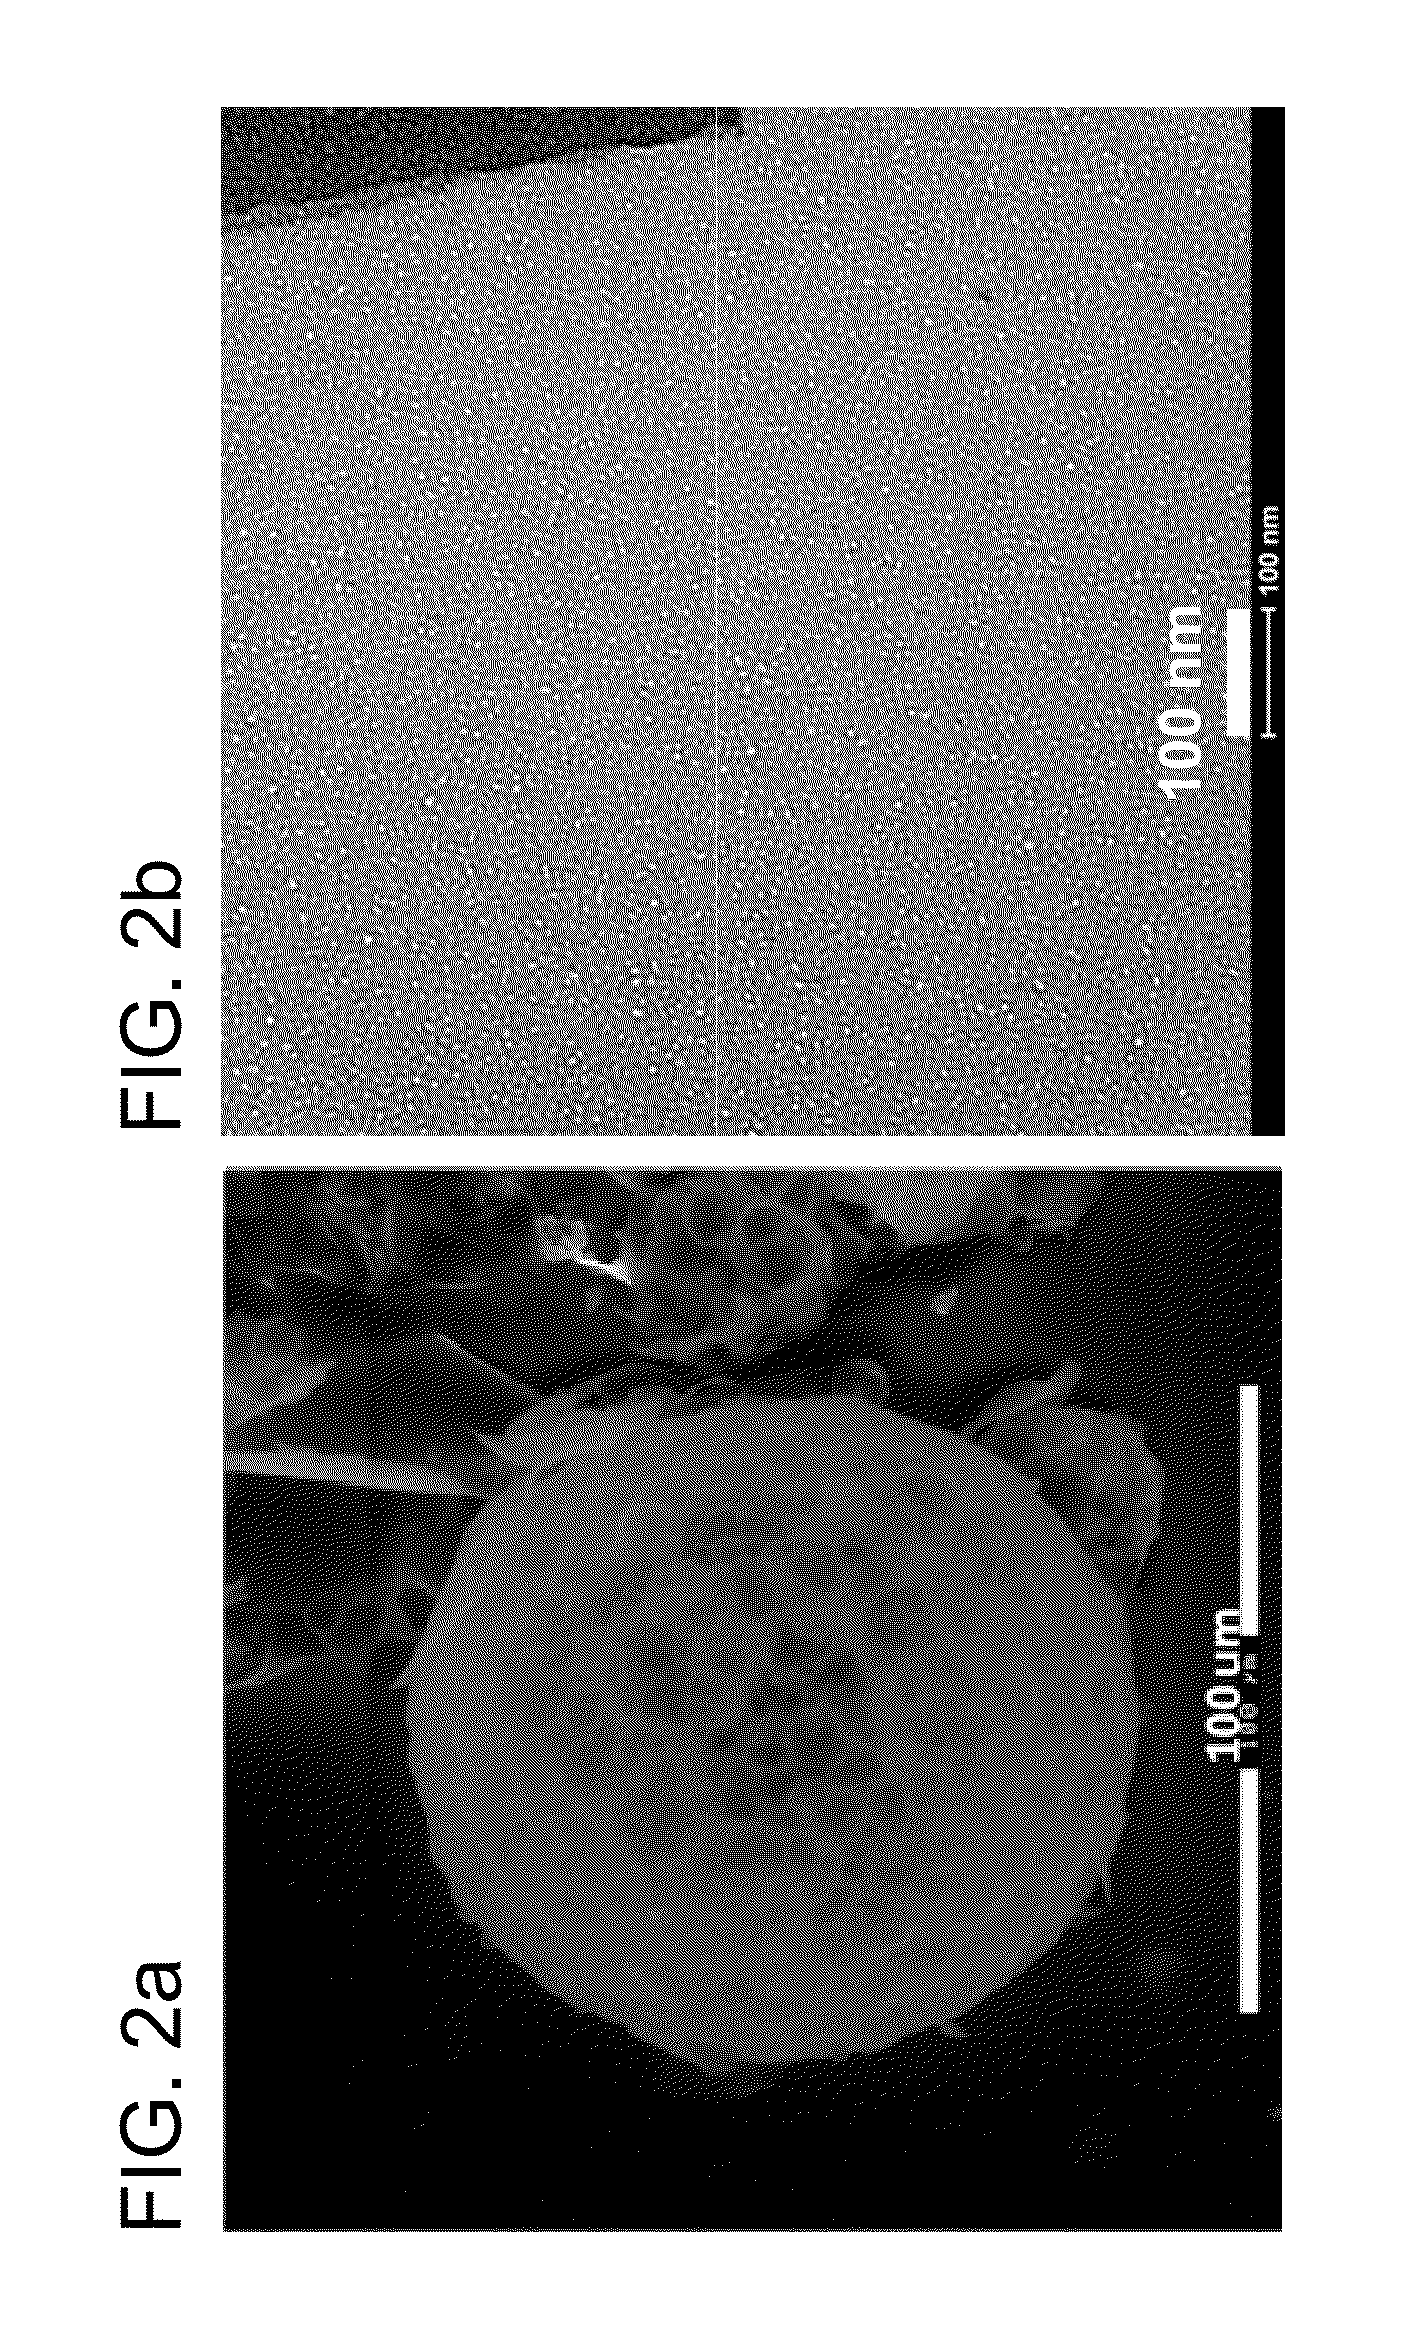 Method for making amorphous particles using a uniform melt-state in a microwave generated plasma torch